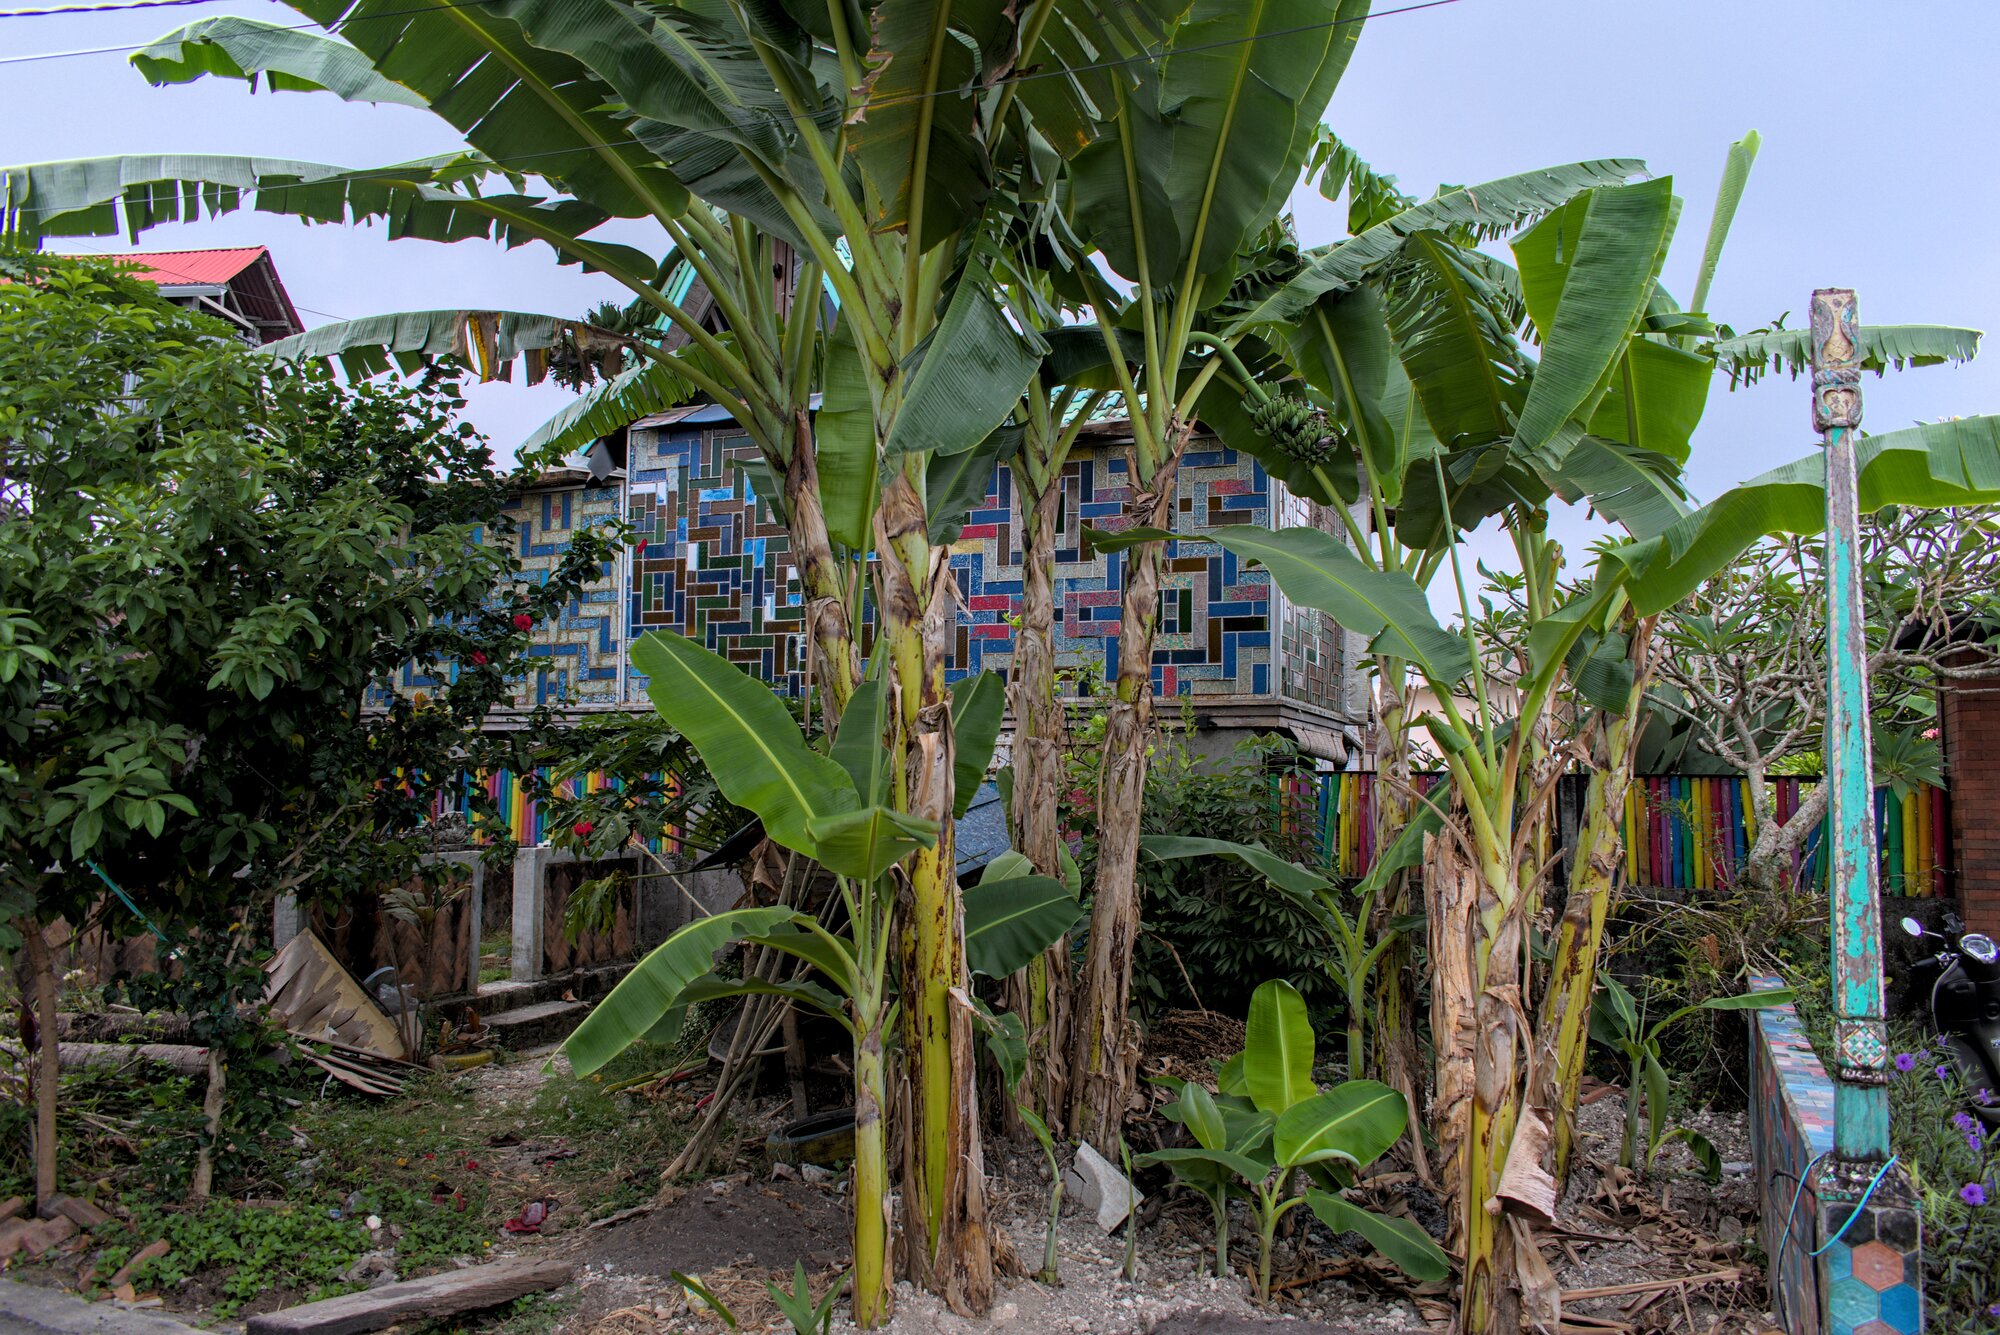 A home of some kind with an enormous mosaic wall, behind banana trees and other foliage.